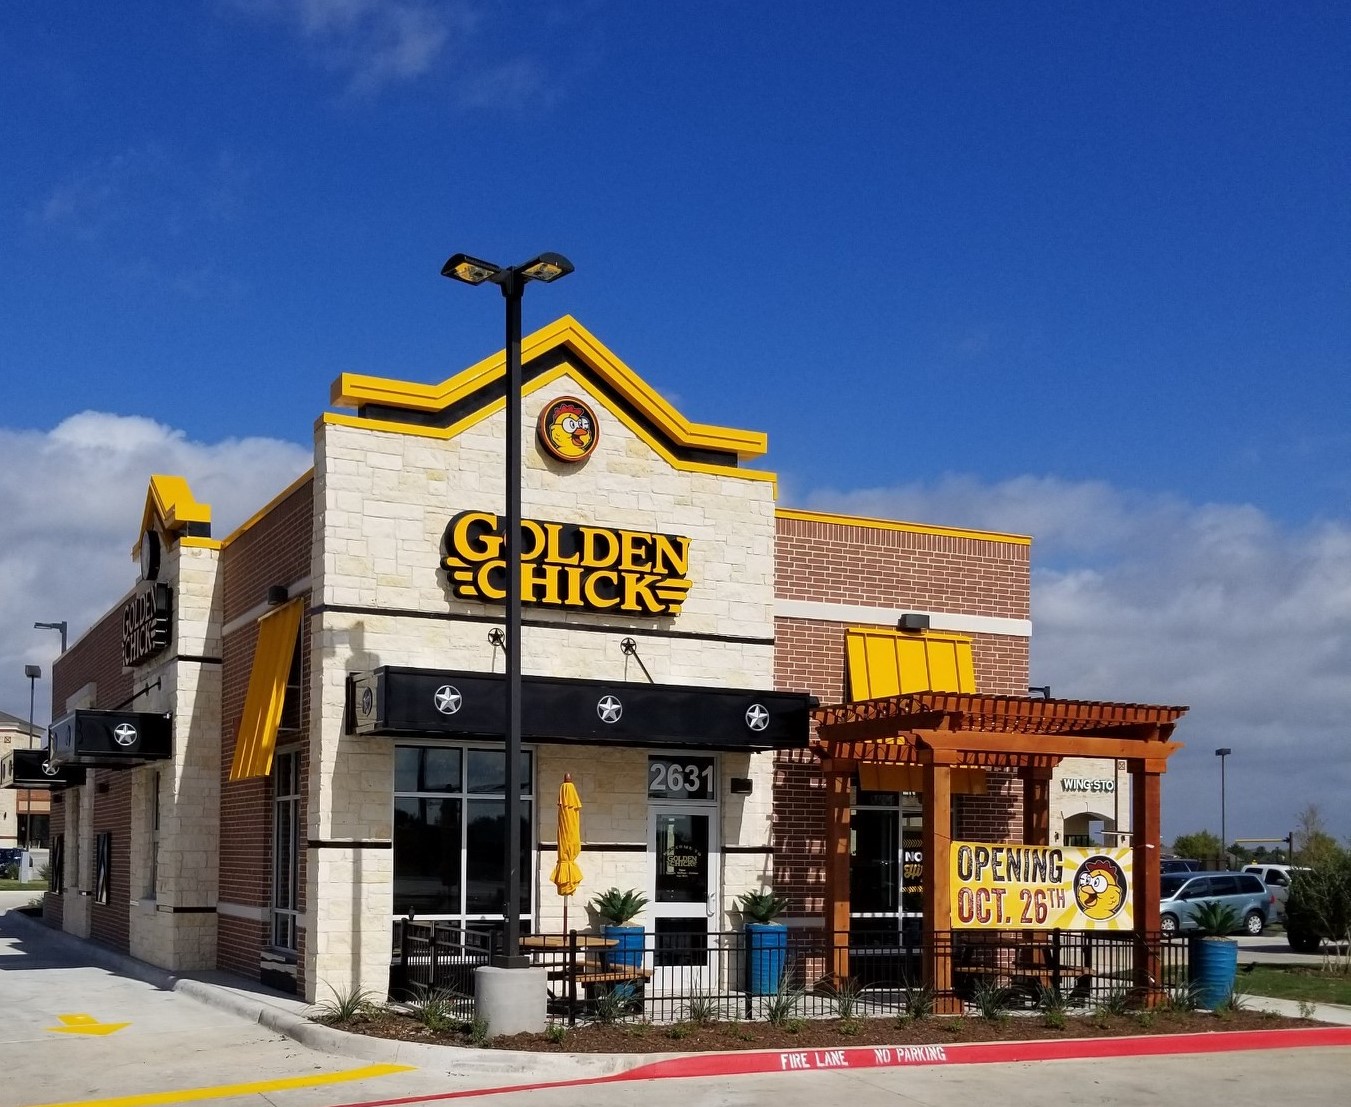 Golden Chick storefront.  Your local Golden Chick fast food restaurant in Melissa, Texas